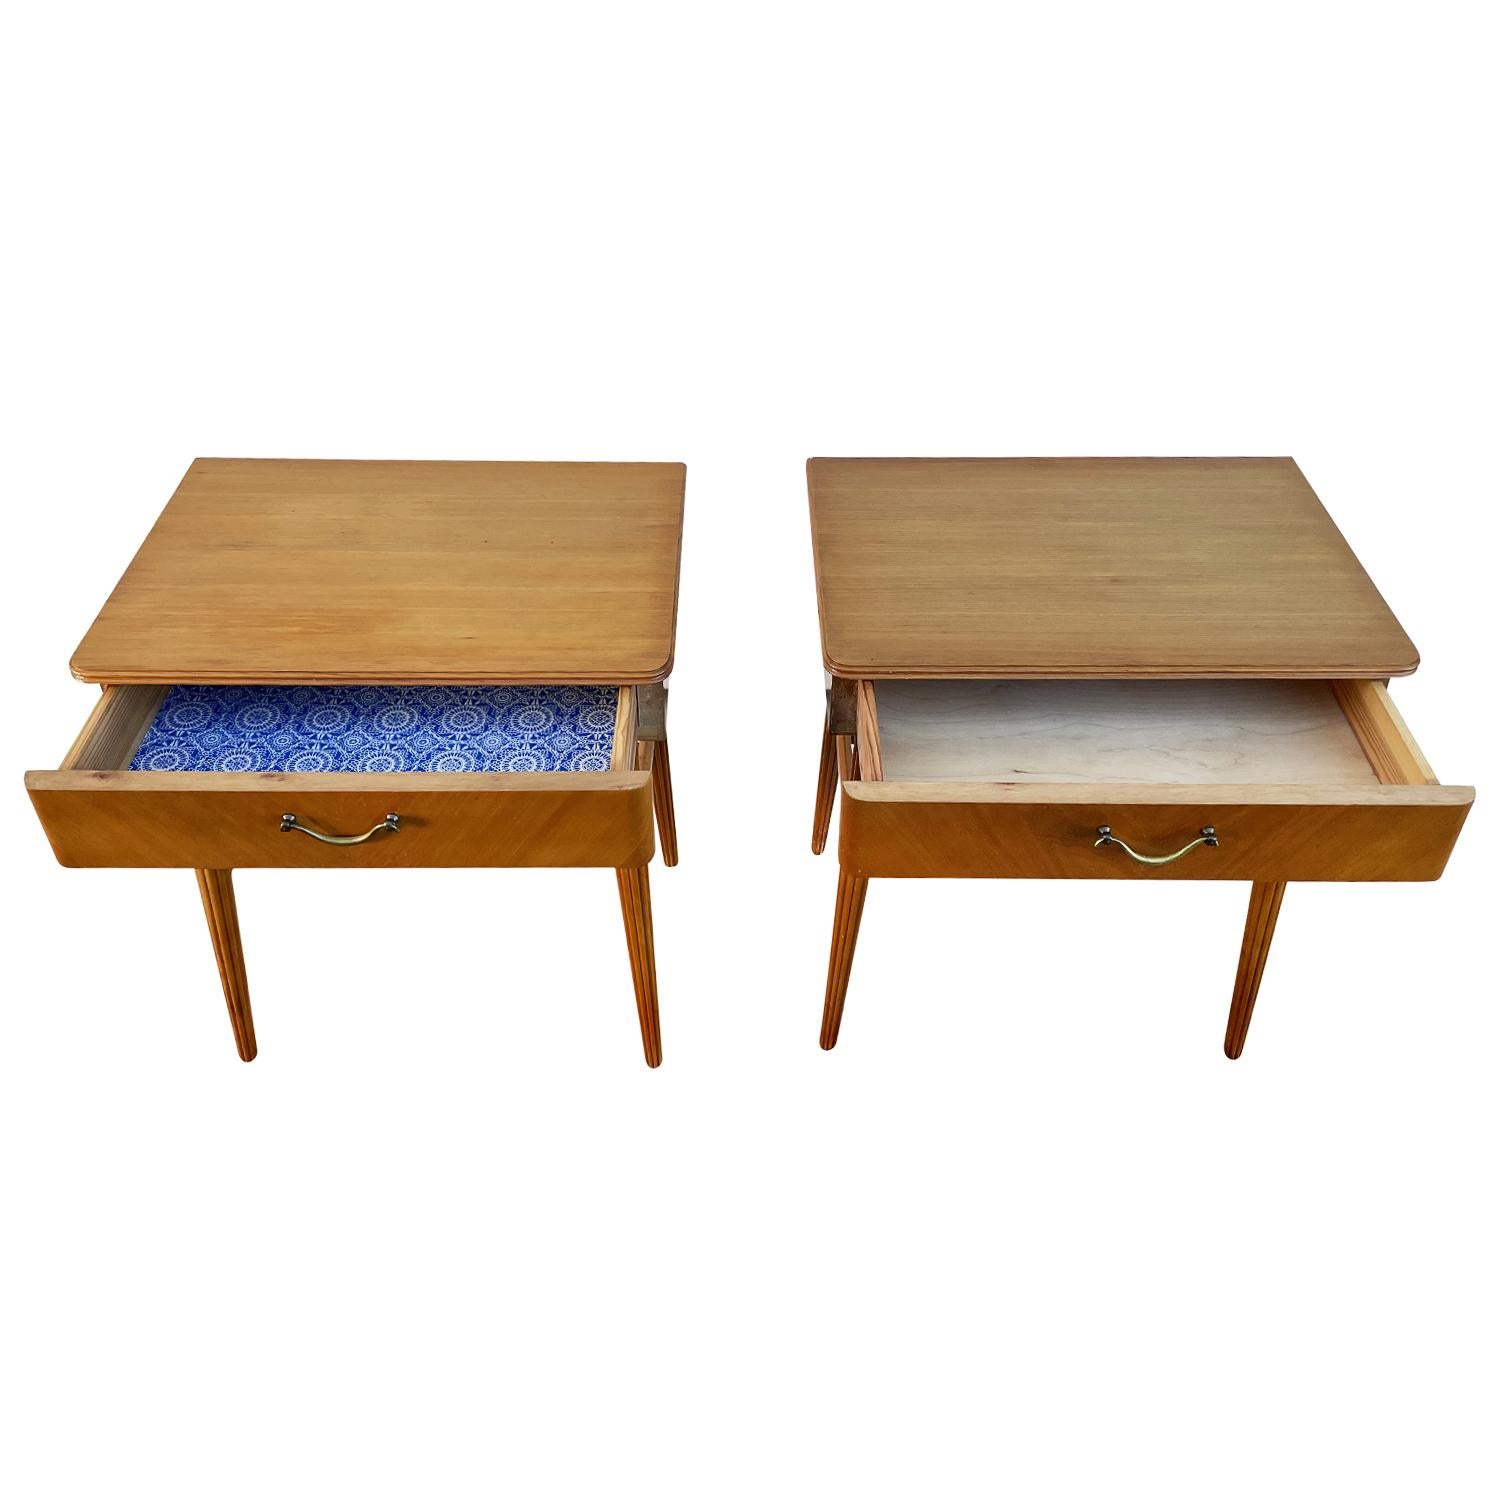 20th Century Danish Pair of Birchwood Nightstands - Vintage Brass Bedside Tables For Sale 3